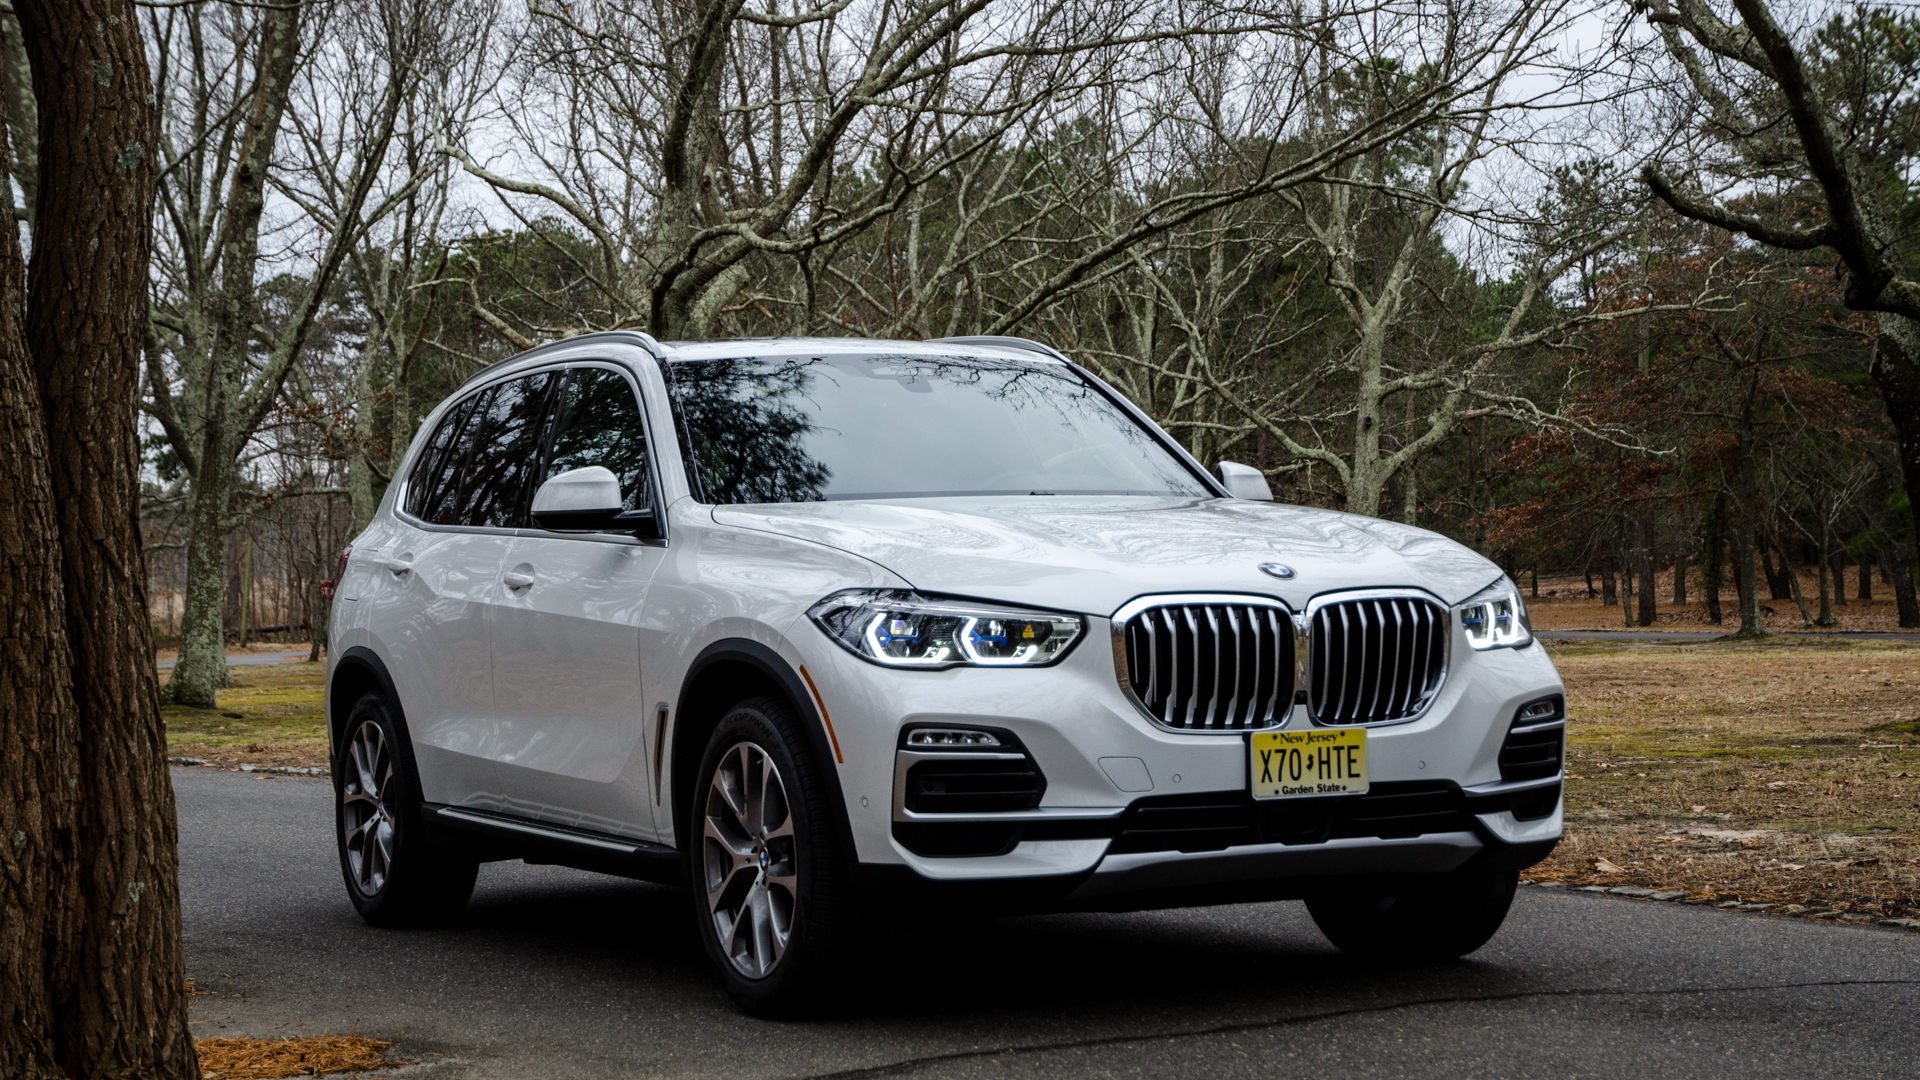 BMW X5 might be getting some company from the Genesis GV80